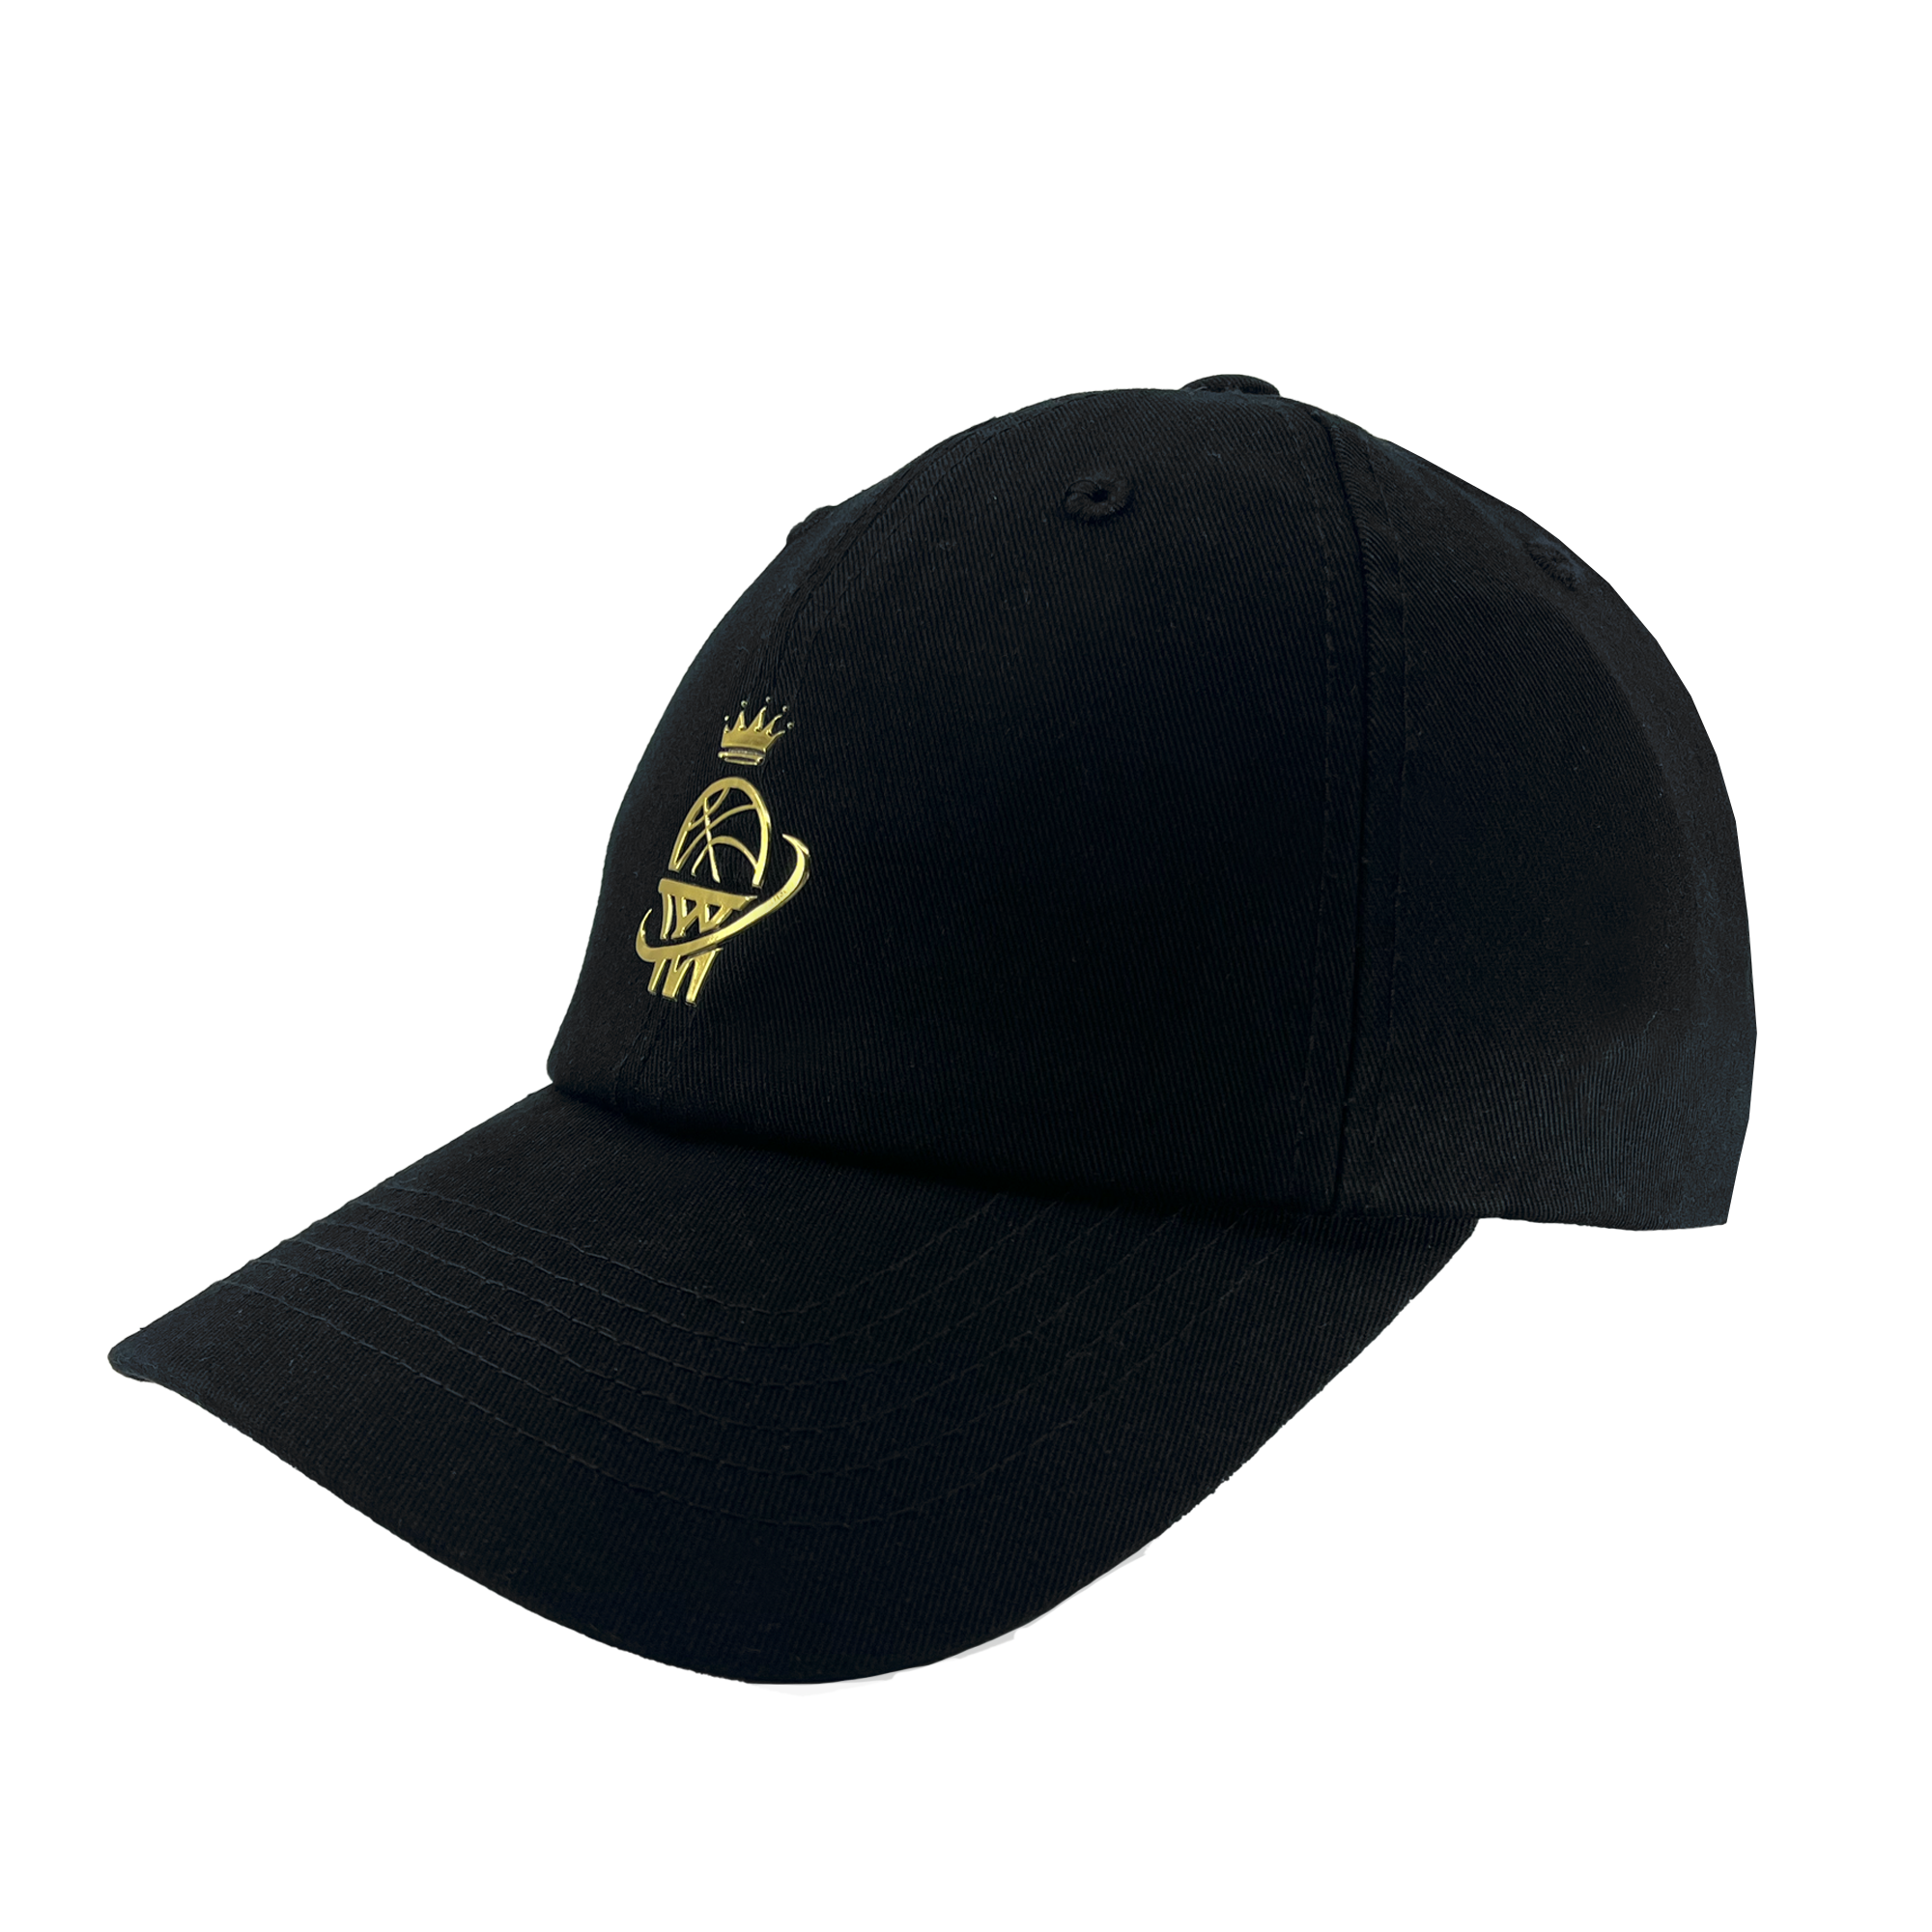 Side angled view of a black ball cap with gold WPBA logo on the front crown.